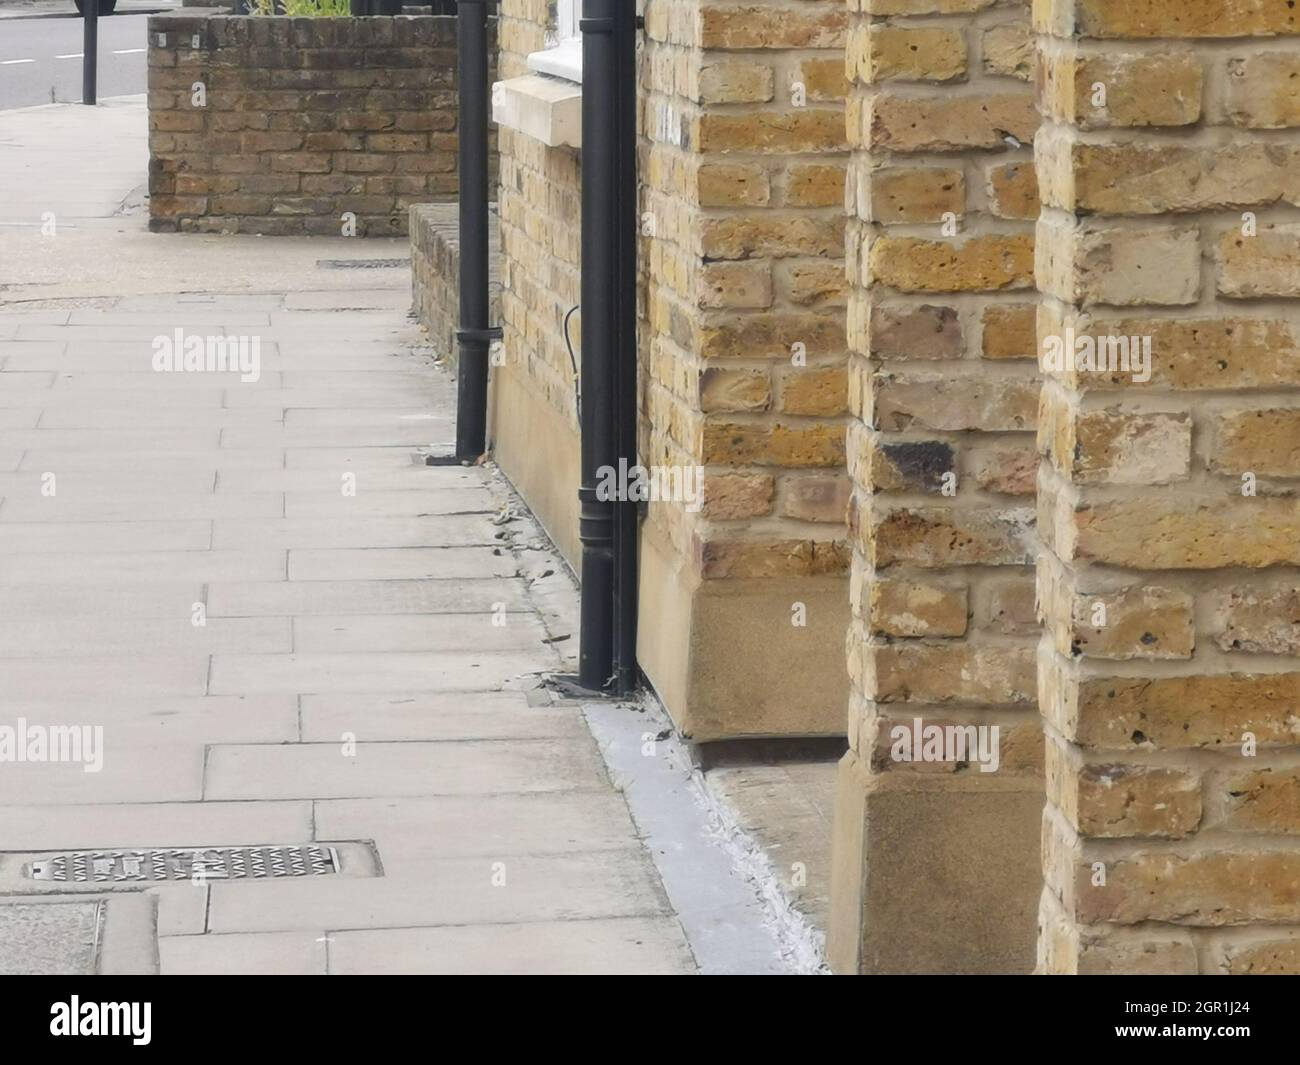 Brick built pillars and black drain pipes beside pavement in street Stock Photo